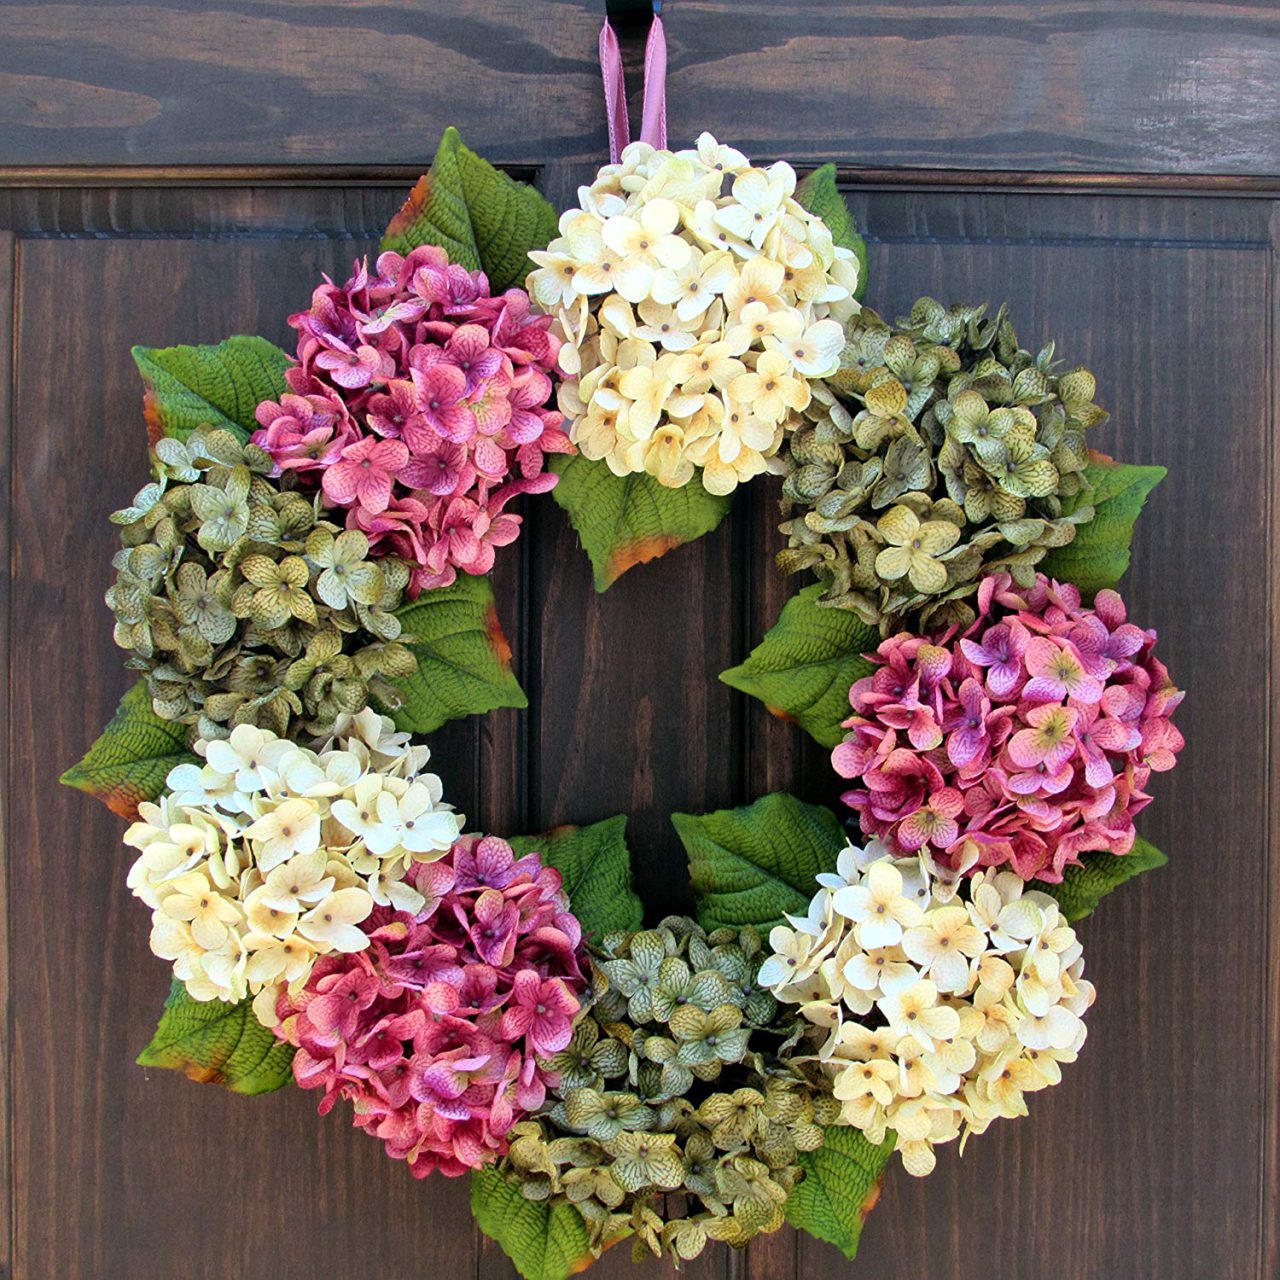 Spring-Summer-Hydrangea-Wreath-for-Front-Door-Decor-Rose-Pink-Cream-and ...